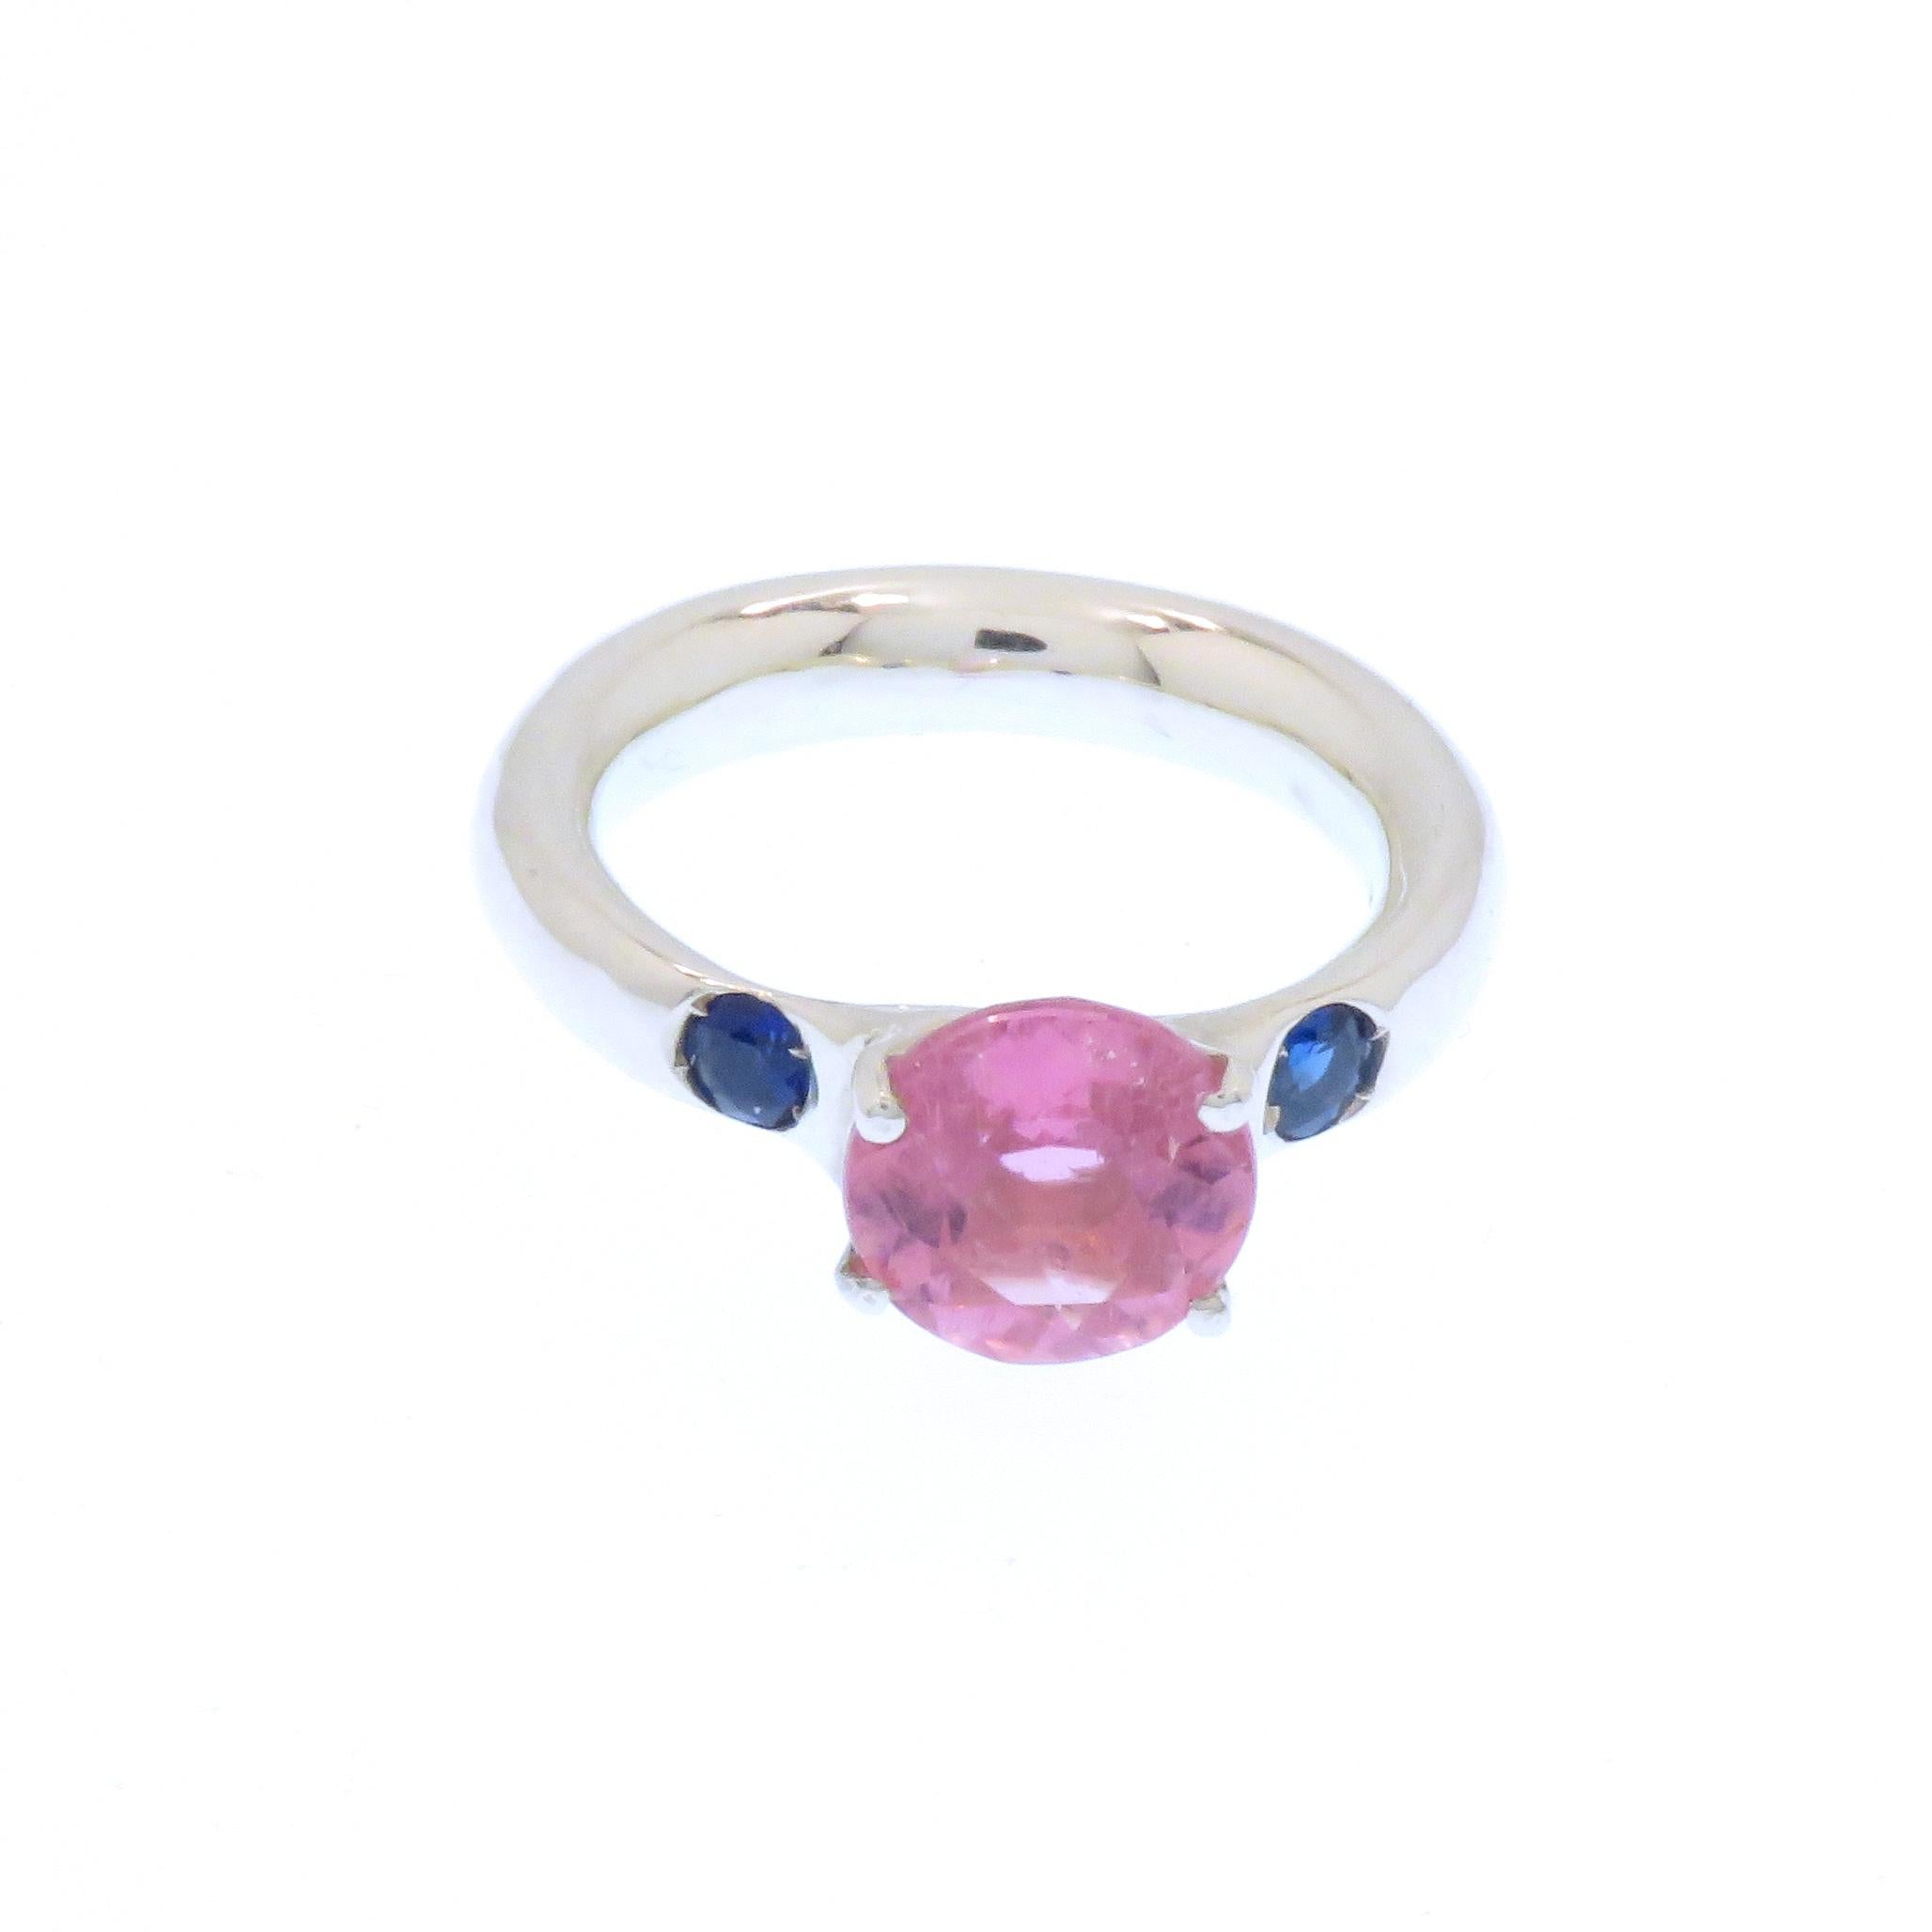 Elegant ring crafted in 9k white gold featuring a natural 2.25 ctw brilliant cut pink tourmaline  in its centre, flanked by two round cut blue sapphires weighing 0.25 ctw, The dimension of the tourmaline is 8.40 millimeters / 0.330 inches. Us finger